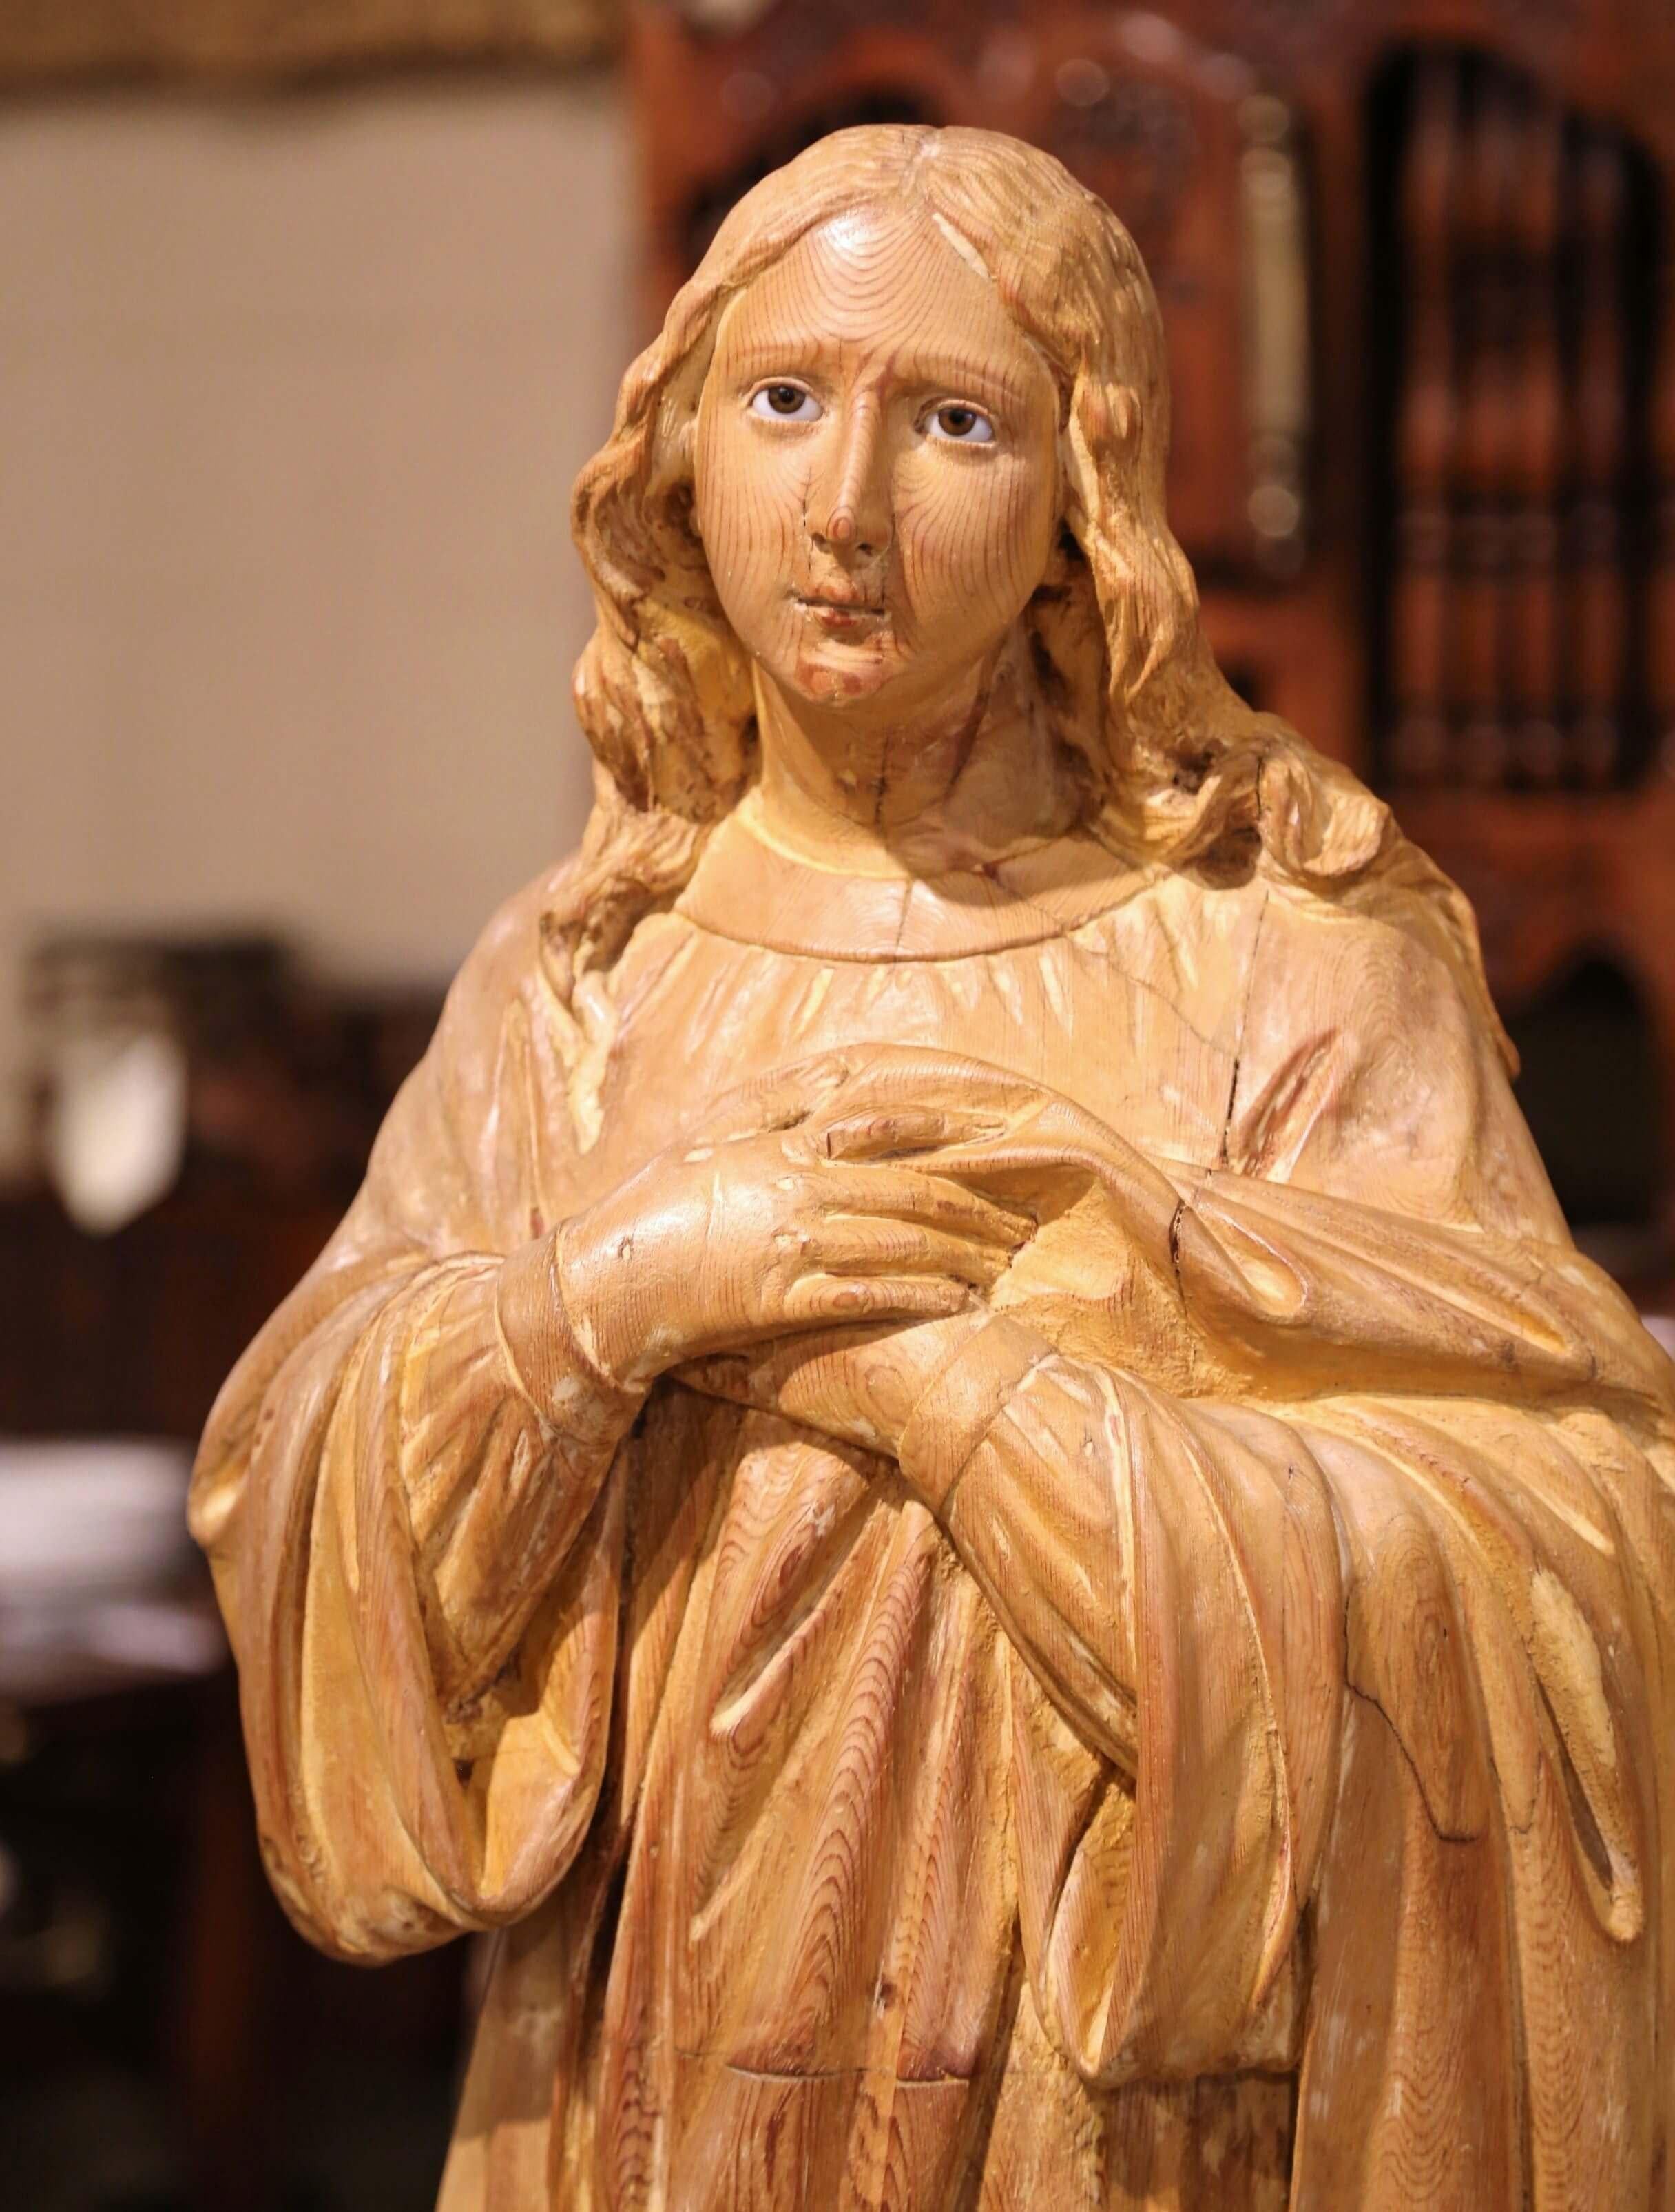 This large two-piece antique female statue on base was crafted in Normandy, France, circa 1820. Made of pine wood, the tall figure depicts a religious figure woman in adoration standing, her arms are crossed over her heart; the sculpture is resting